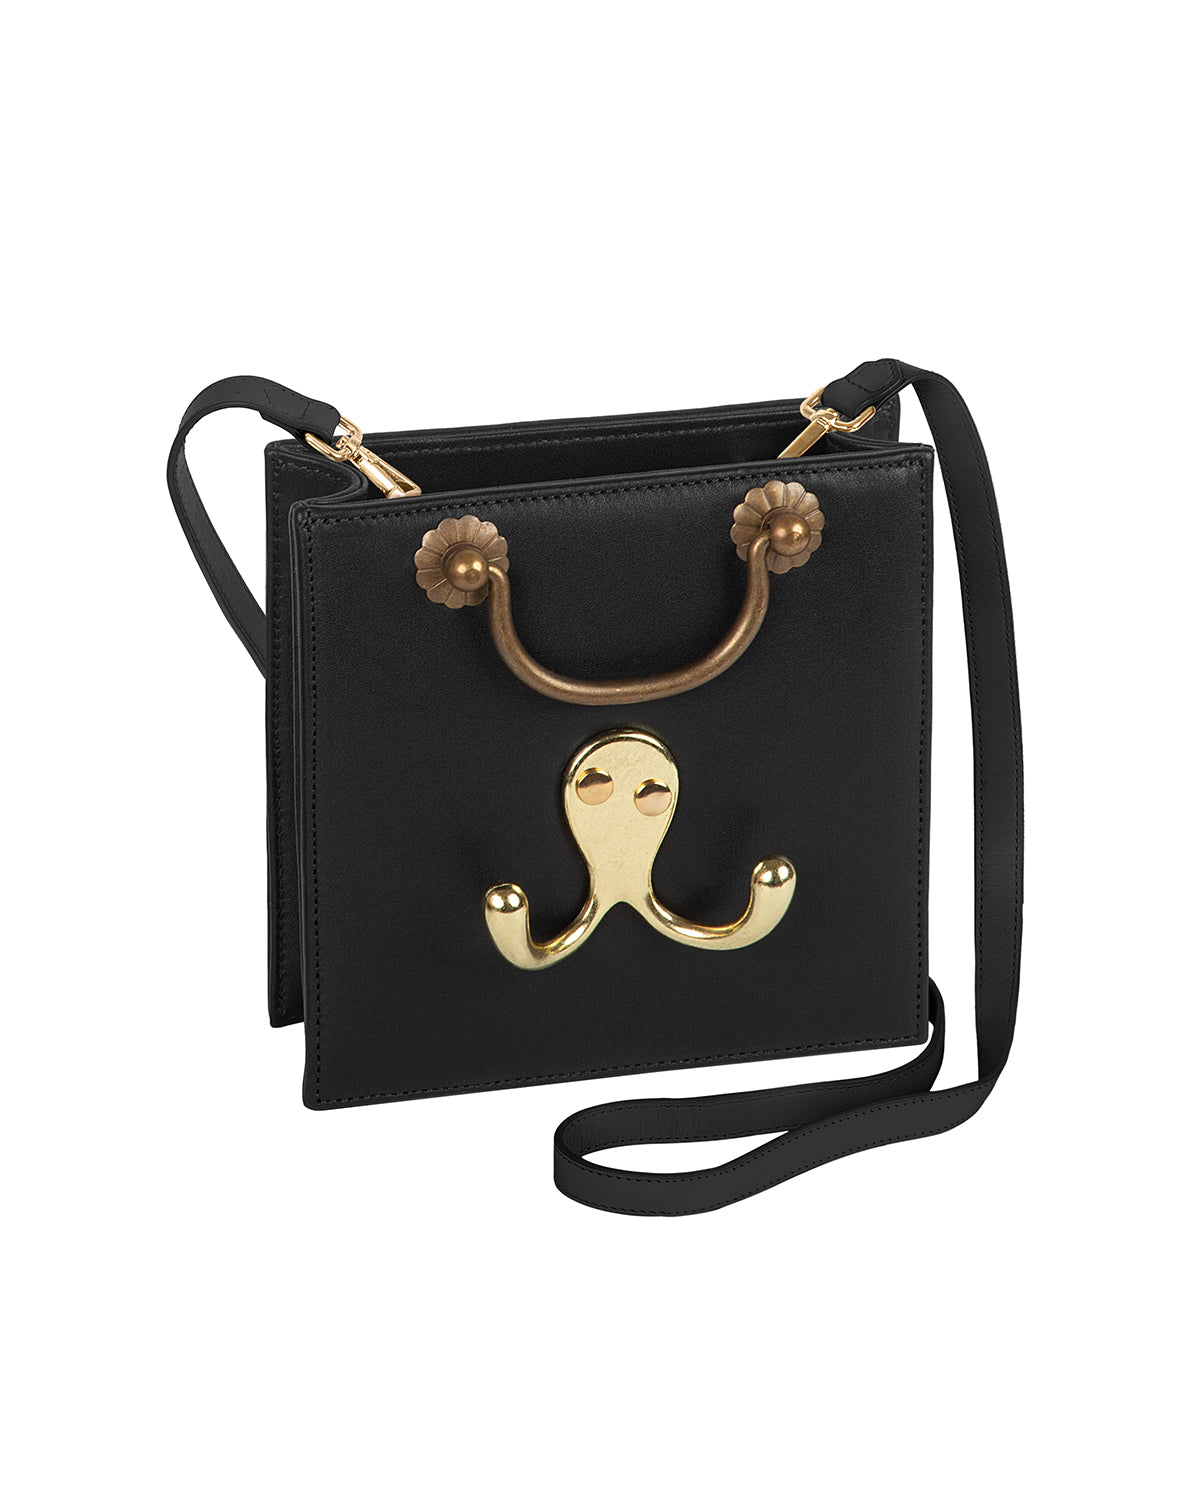 Mini black leather bag with gold handle and hanger hardware.